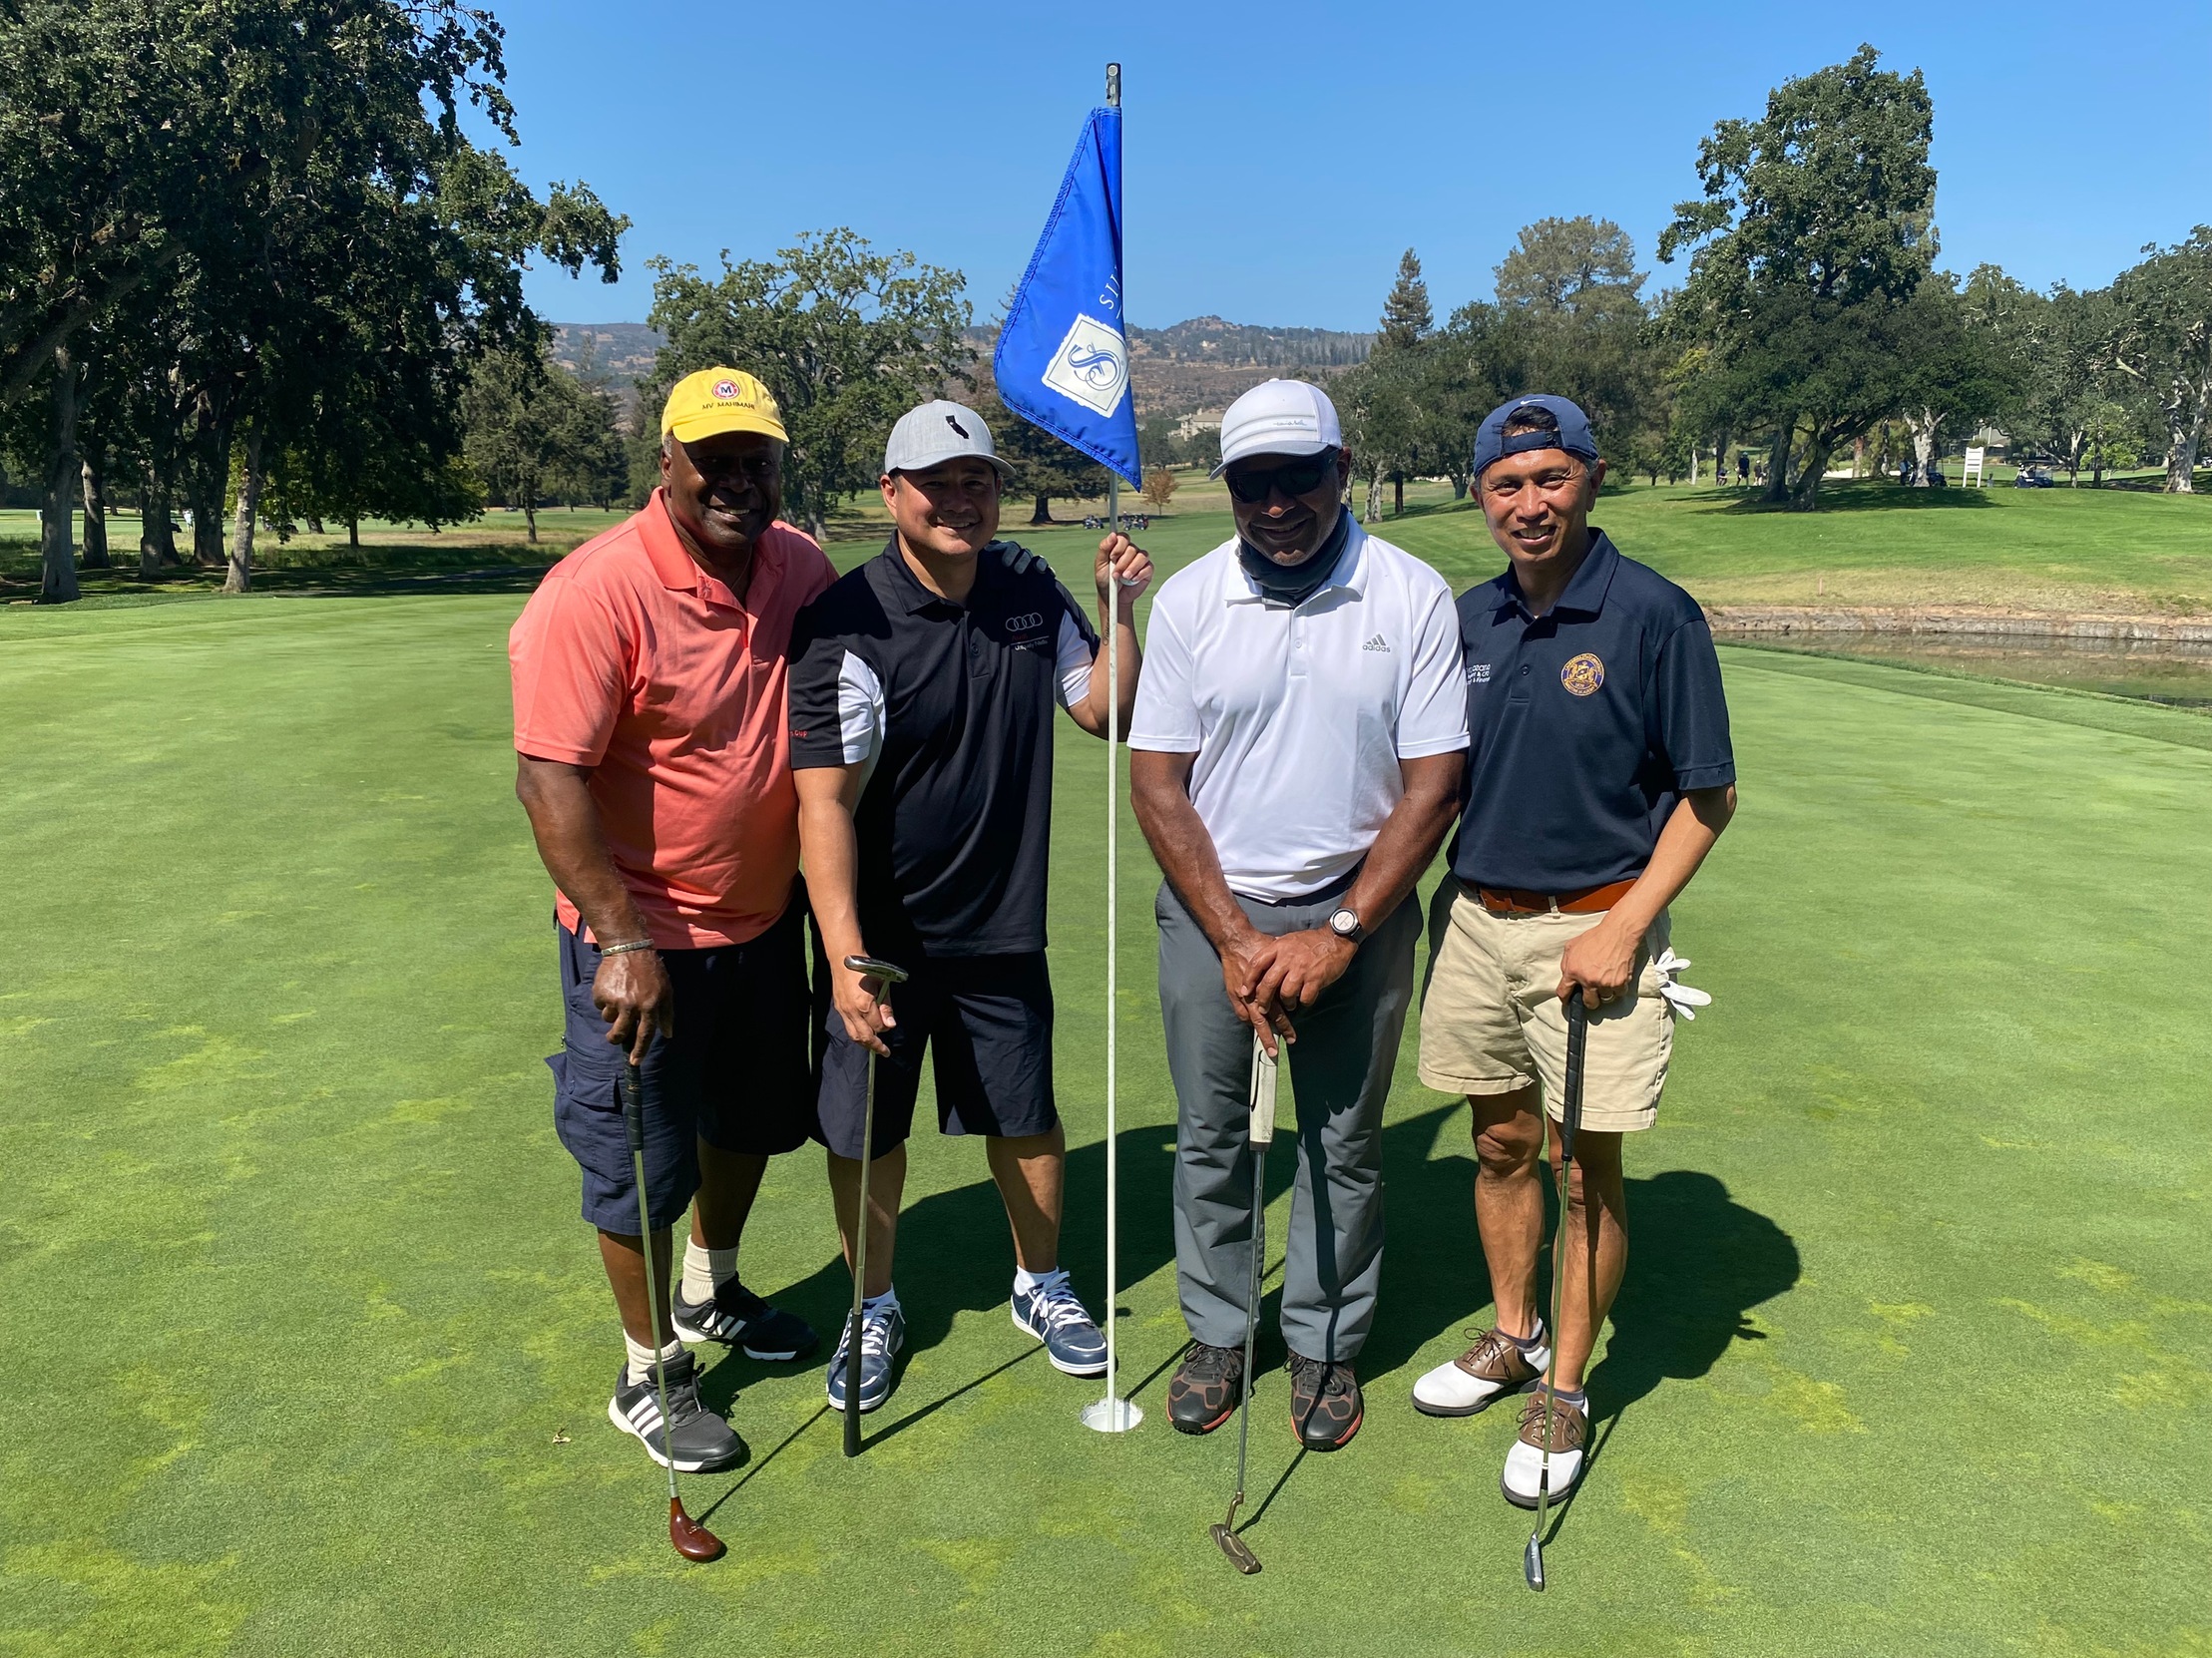 2021 Photo - Participants at the Cal Maritime Athletics Annual Golf Tournament at Blue Rock Springs, Vallejo, CA, September 24, 2022